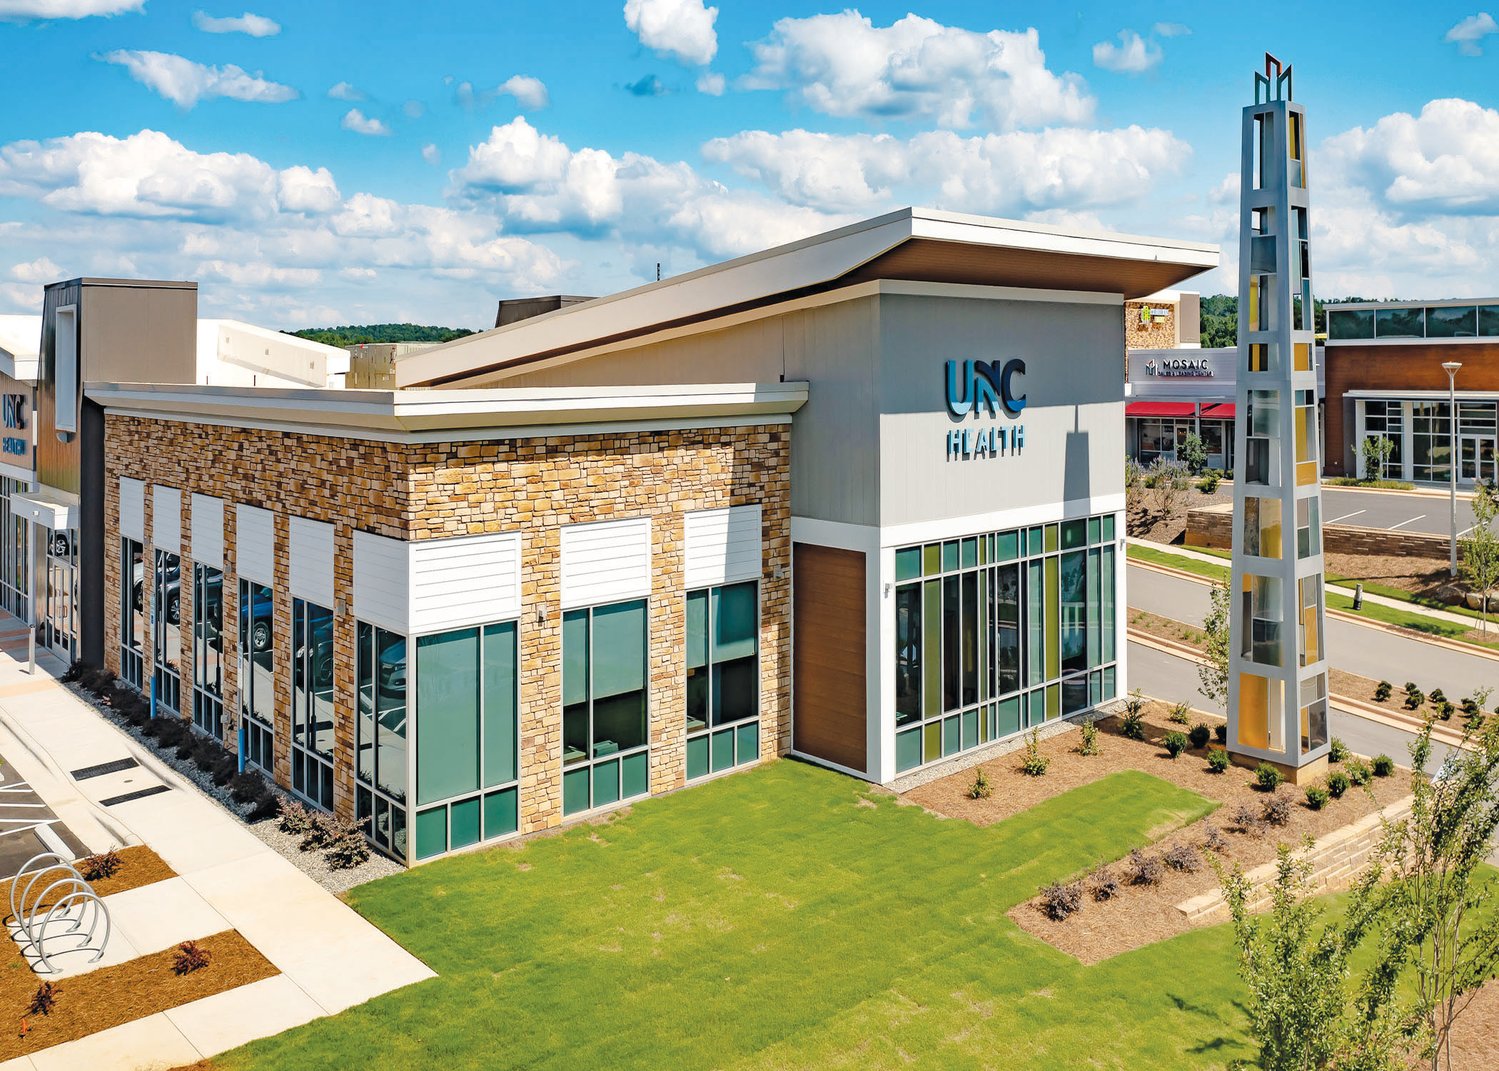 UNC Urgent Care of Chatham Park and UNC Rheumatology of Chatham Park are Mosaic's first tenants, with about 18 more to open in coming months.